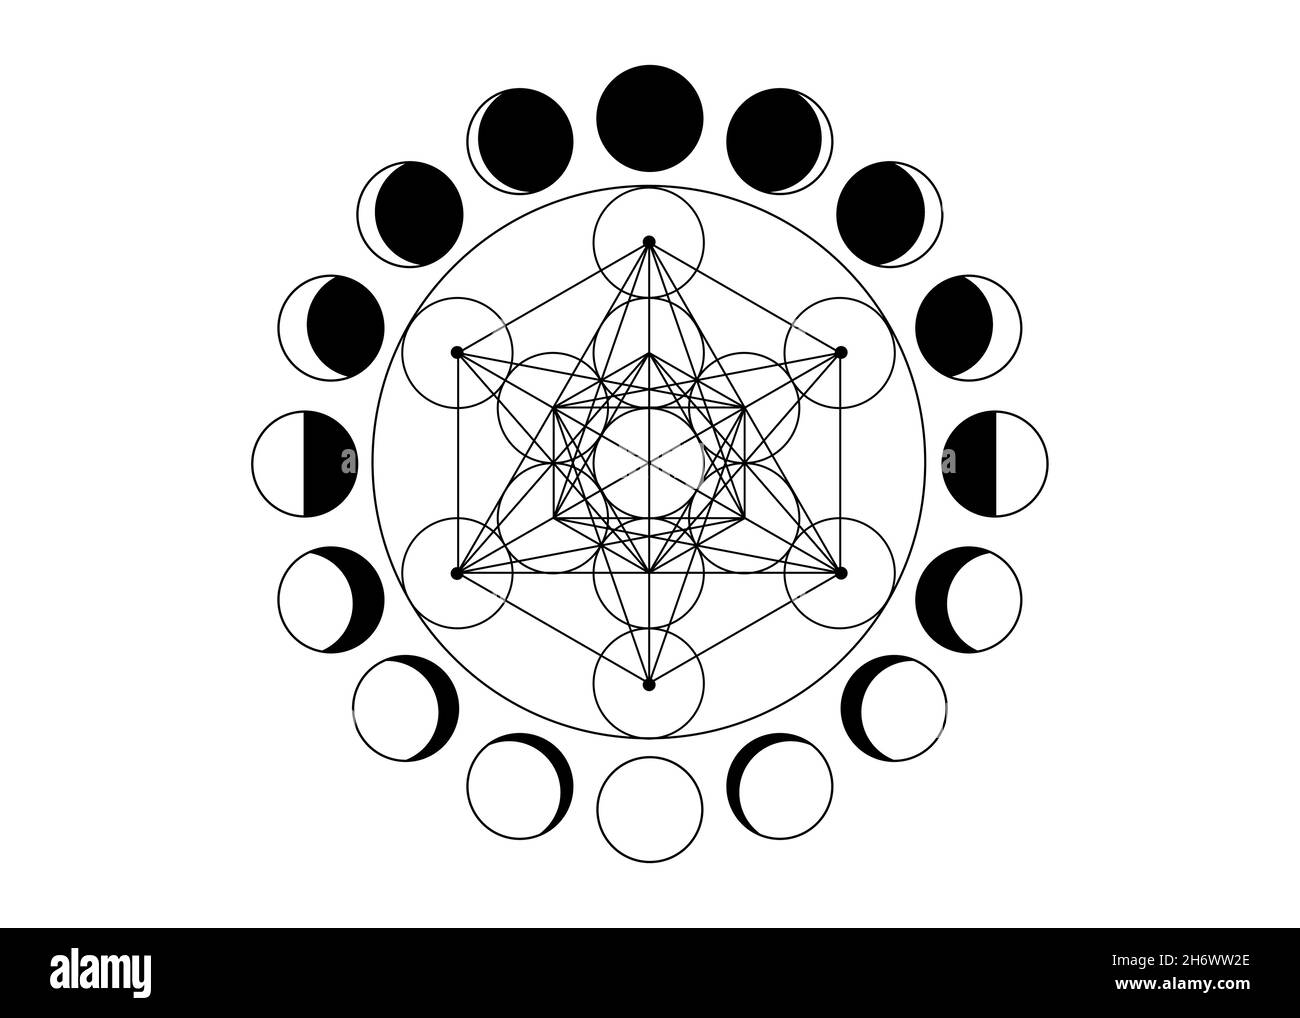 Metatrons Cube, Flower of Life. Sacred geometry, Moon Phases, geometric elements. Mystic icon platonic solids, abstract geometric drawing, crop circle Stock Vector